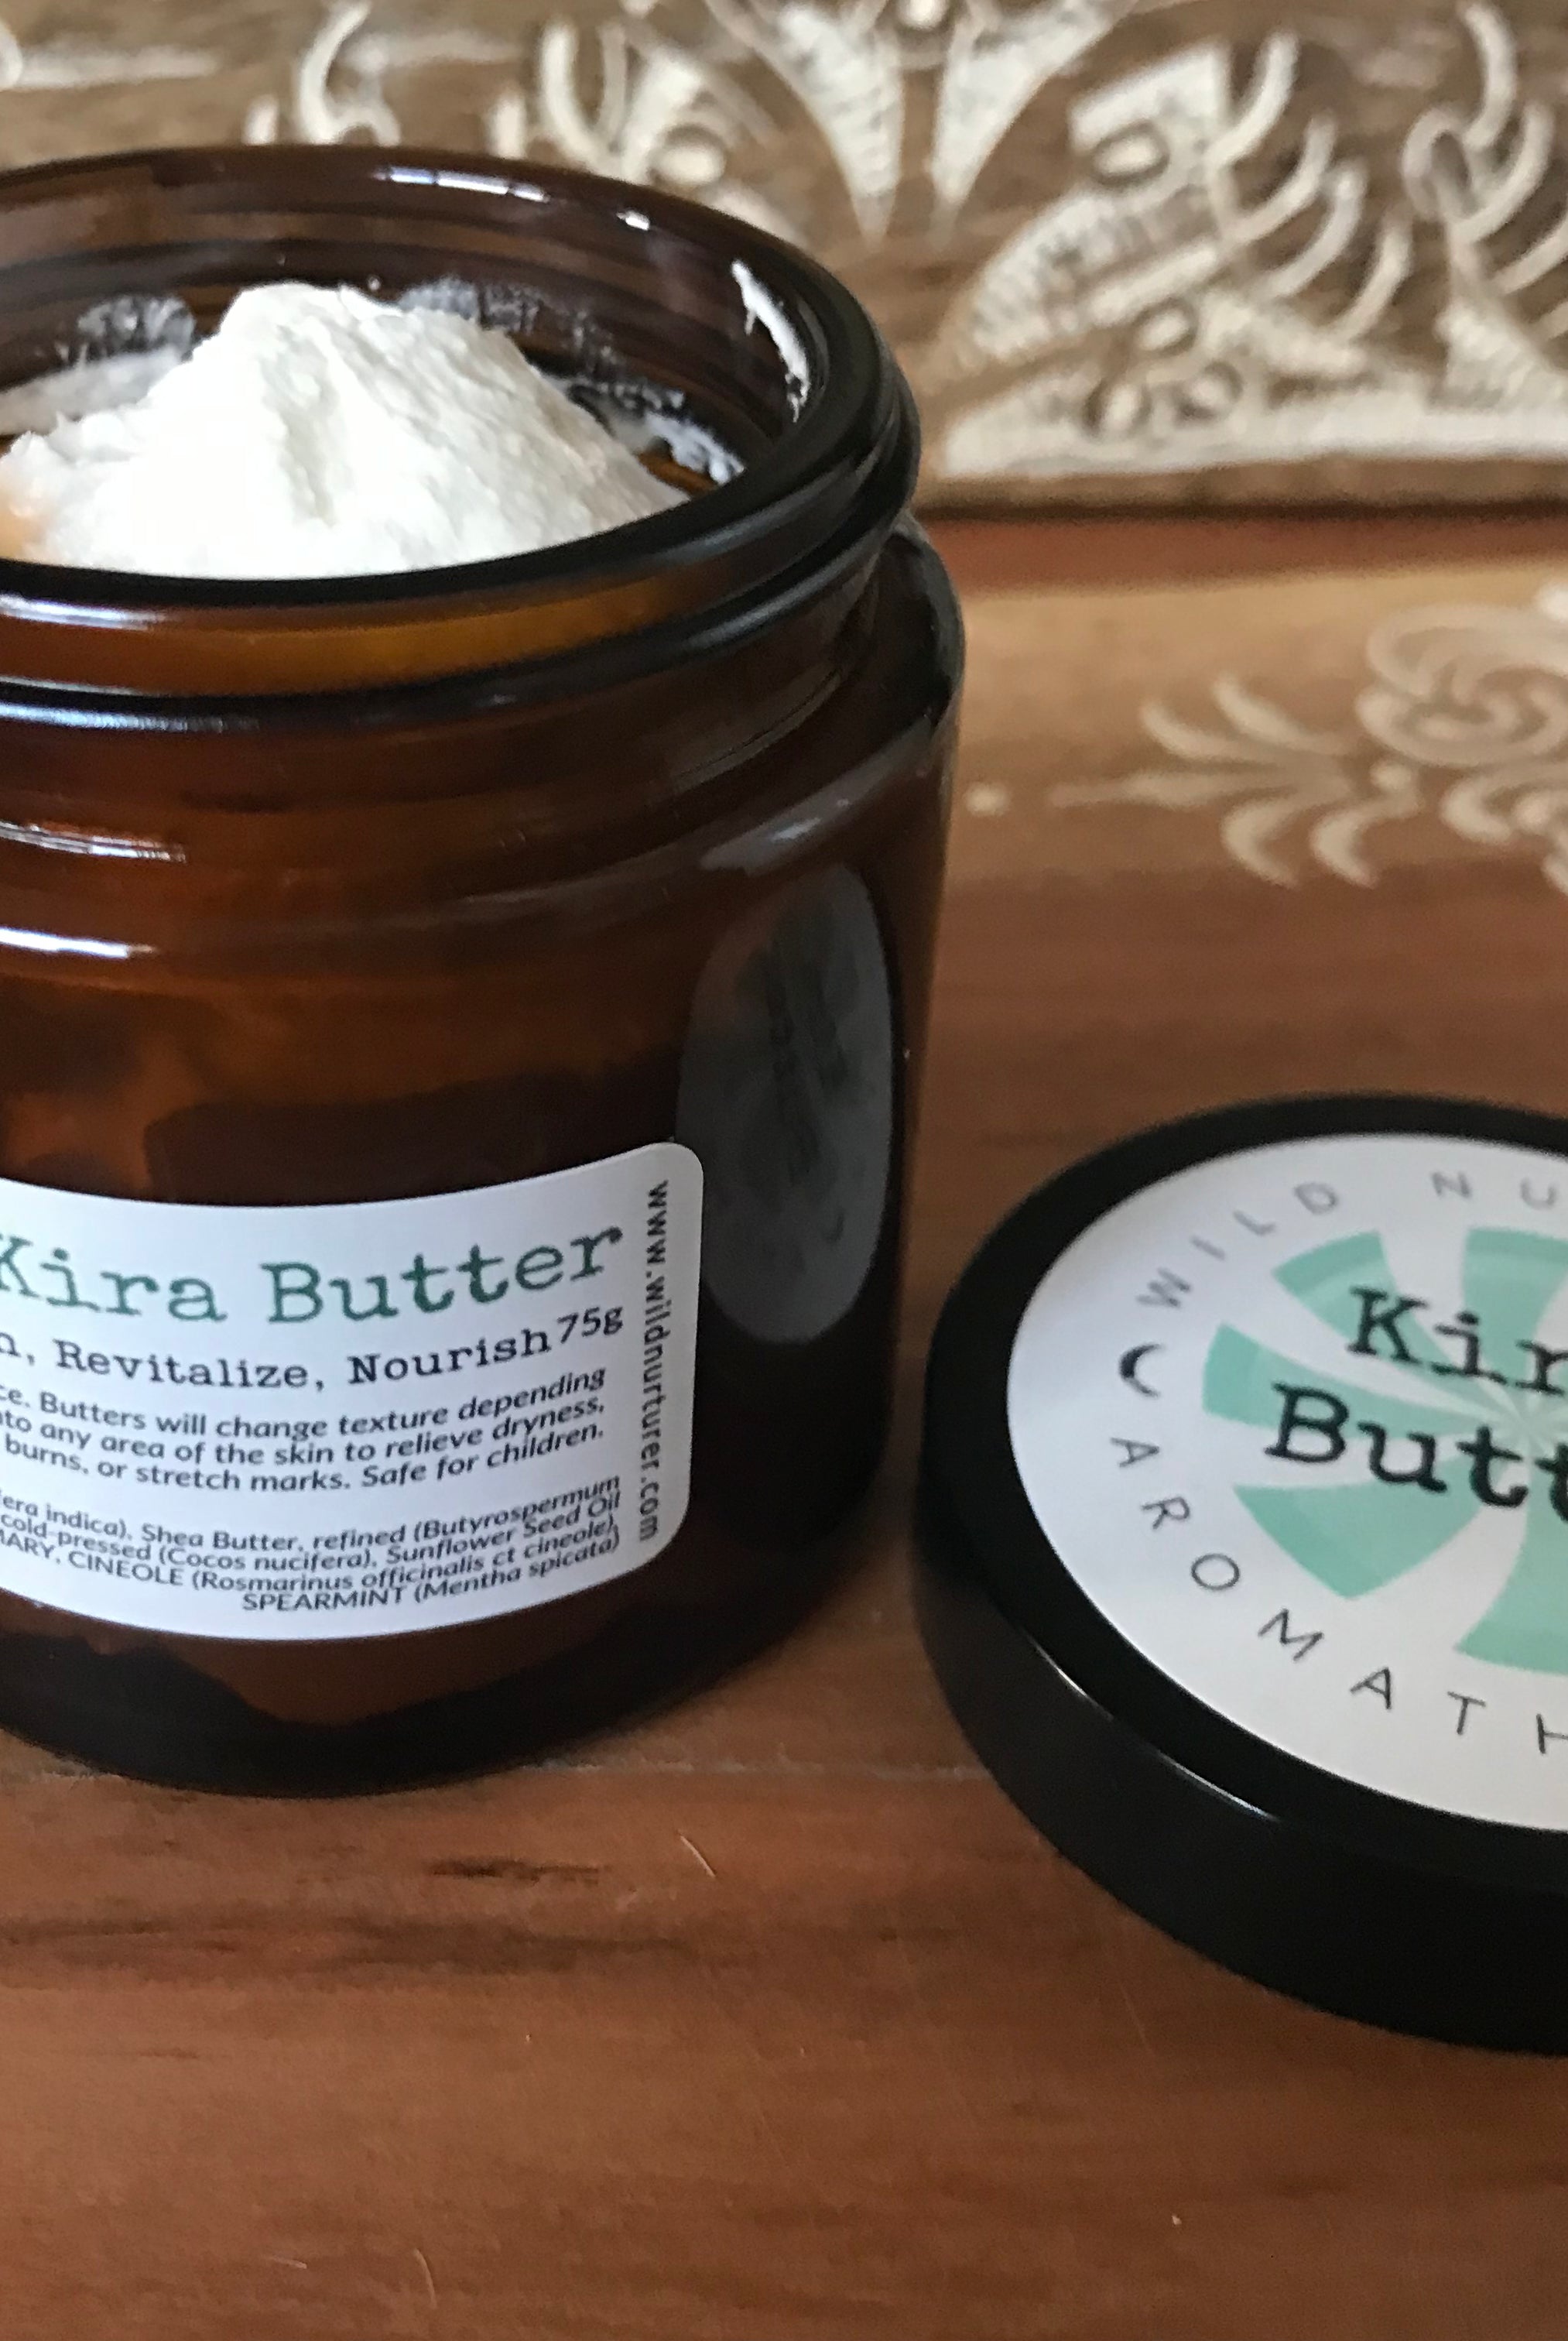 A glass jar of Wild Nurturer Aromatherapy Kira's Collection Rosemary & Mint Body Butter with a white label against a white background. The label includes product details and a green leaf design.